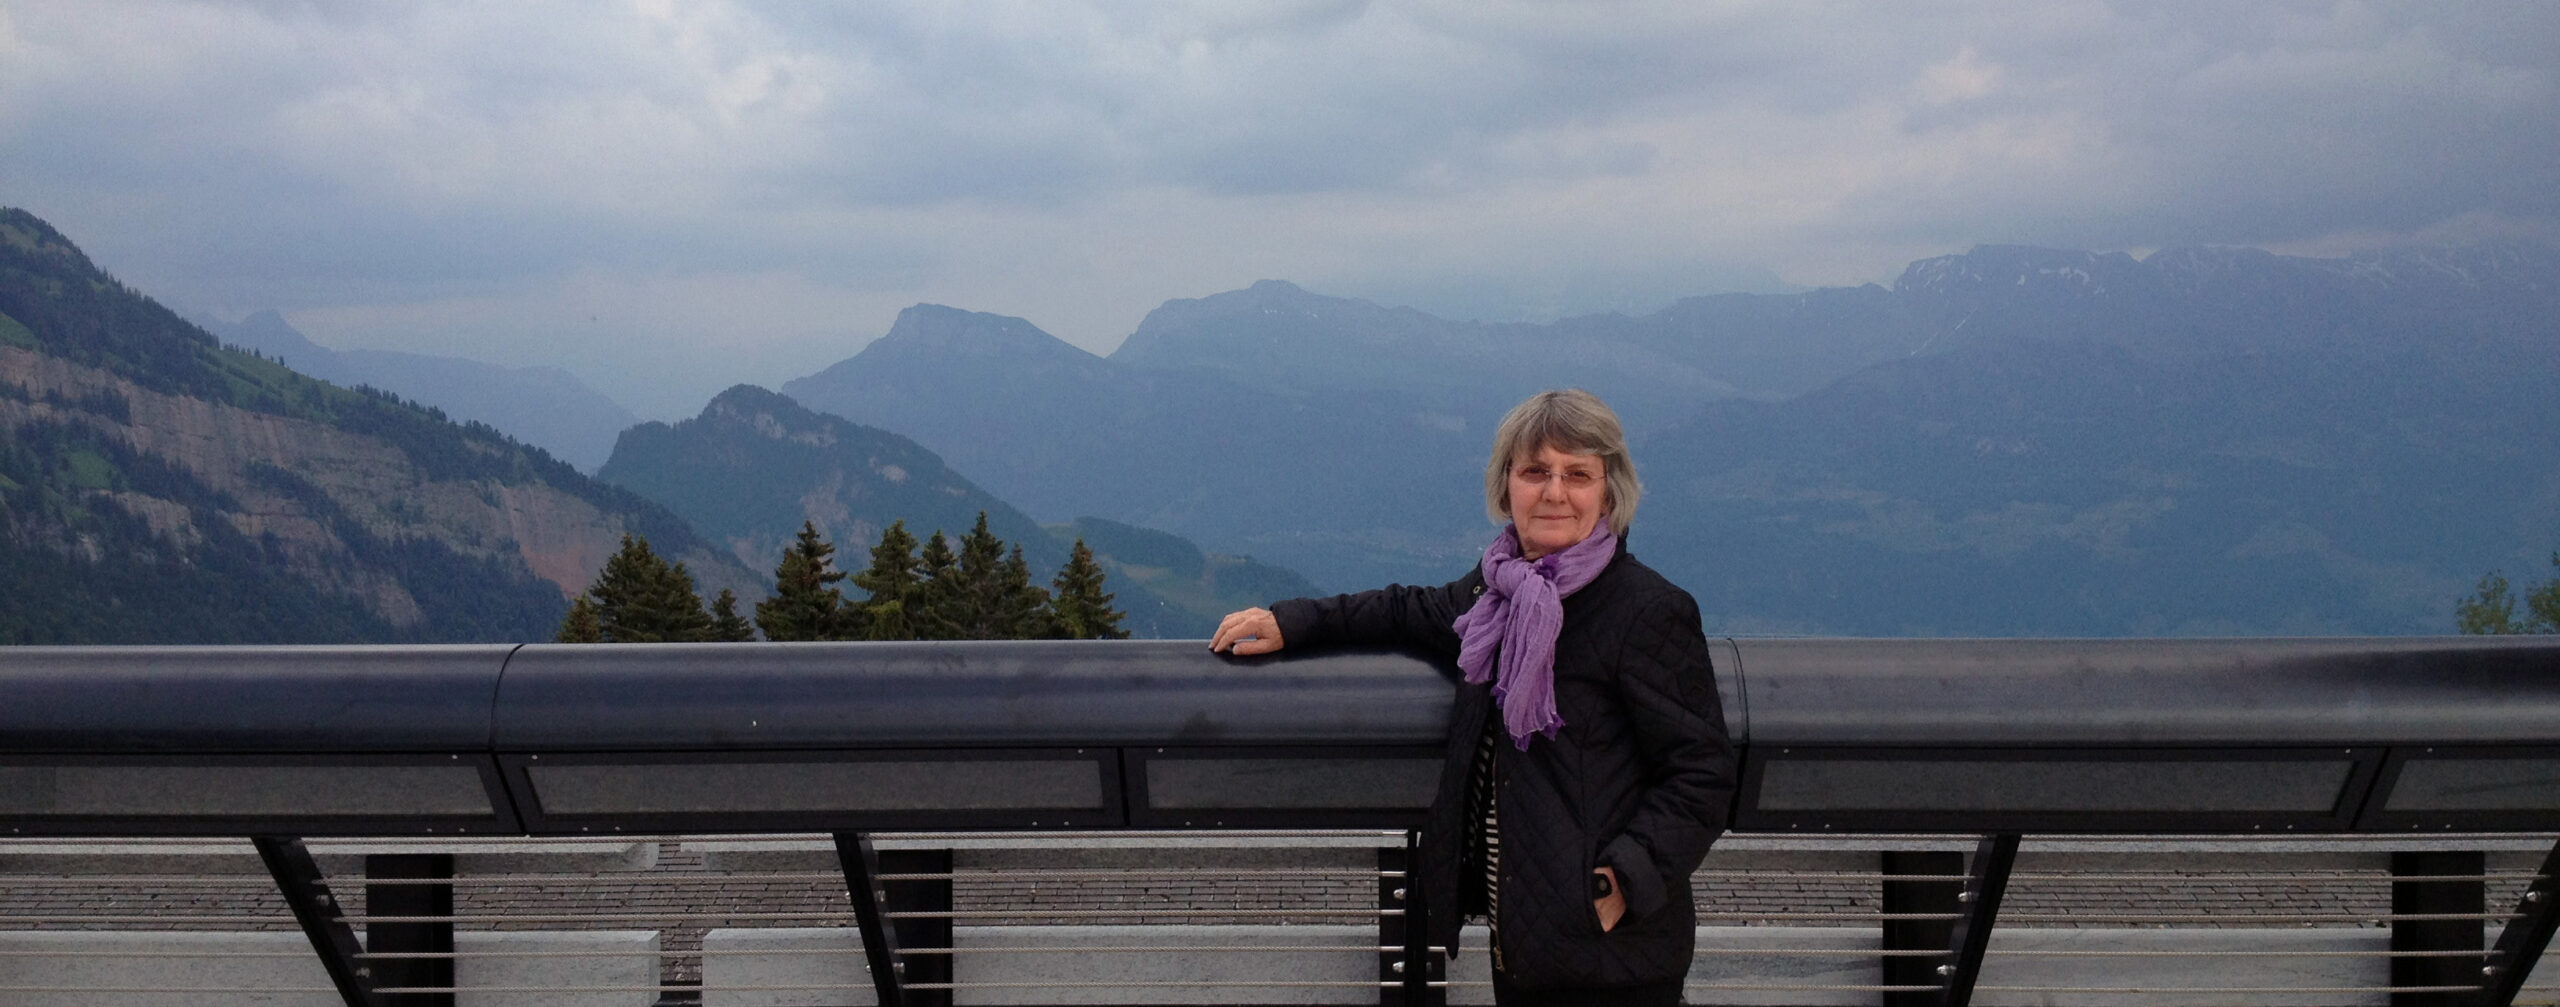 Donna Dunay in foreground with her arm resting on a railing and mountains in the background